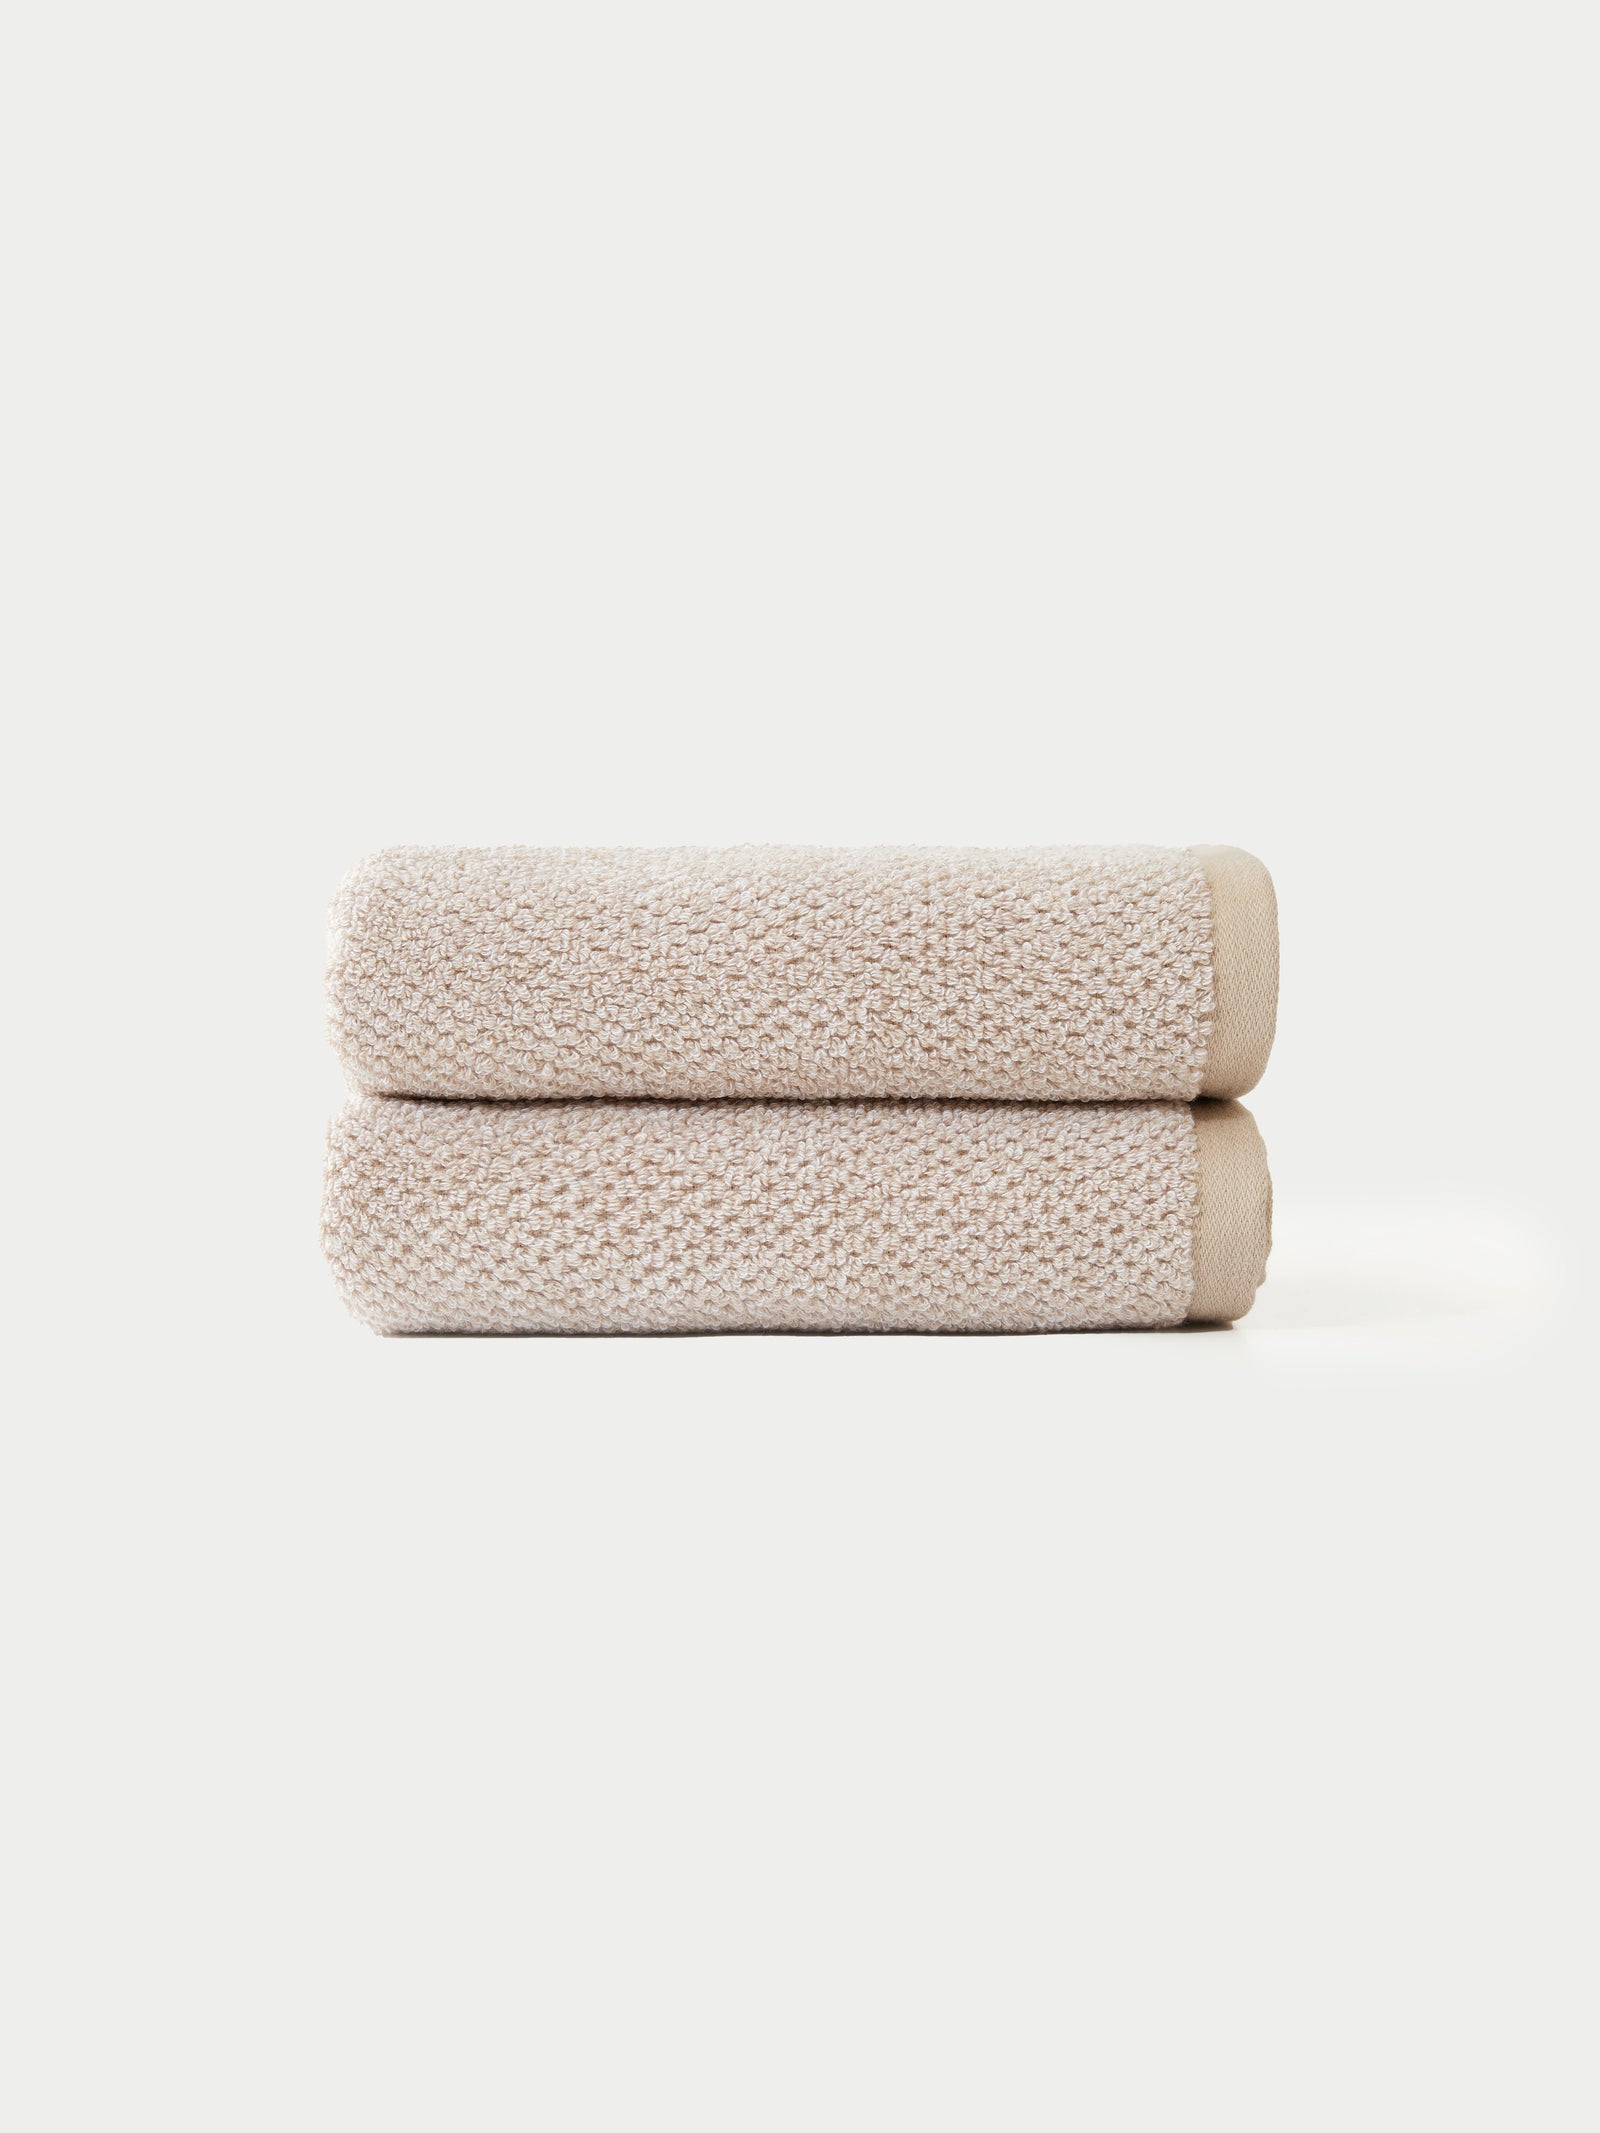 Nantucket Hand Towels in the color Heathered Sand. The Hand Towels are neatly folded. The photo of the Hand Towels was taken with a white background.